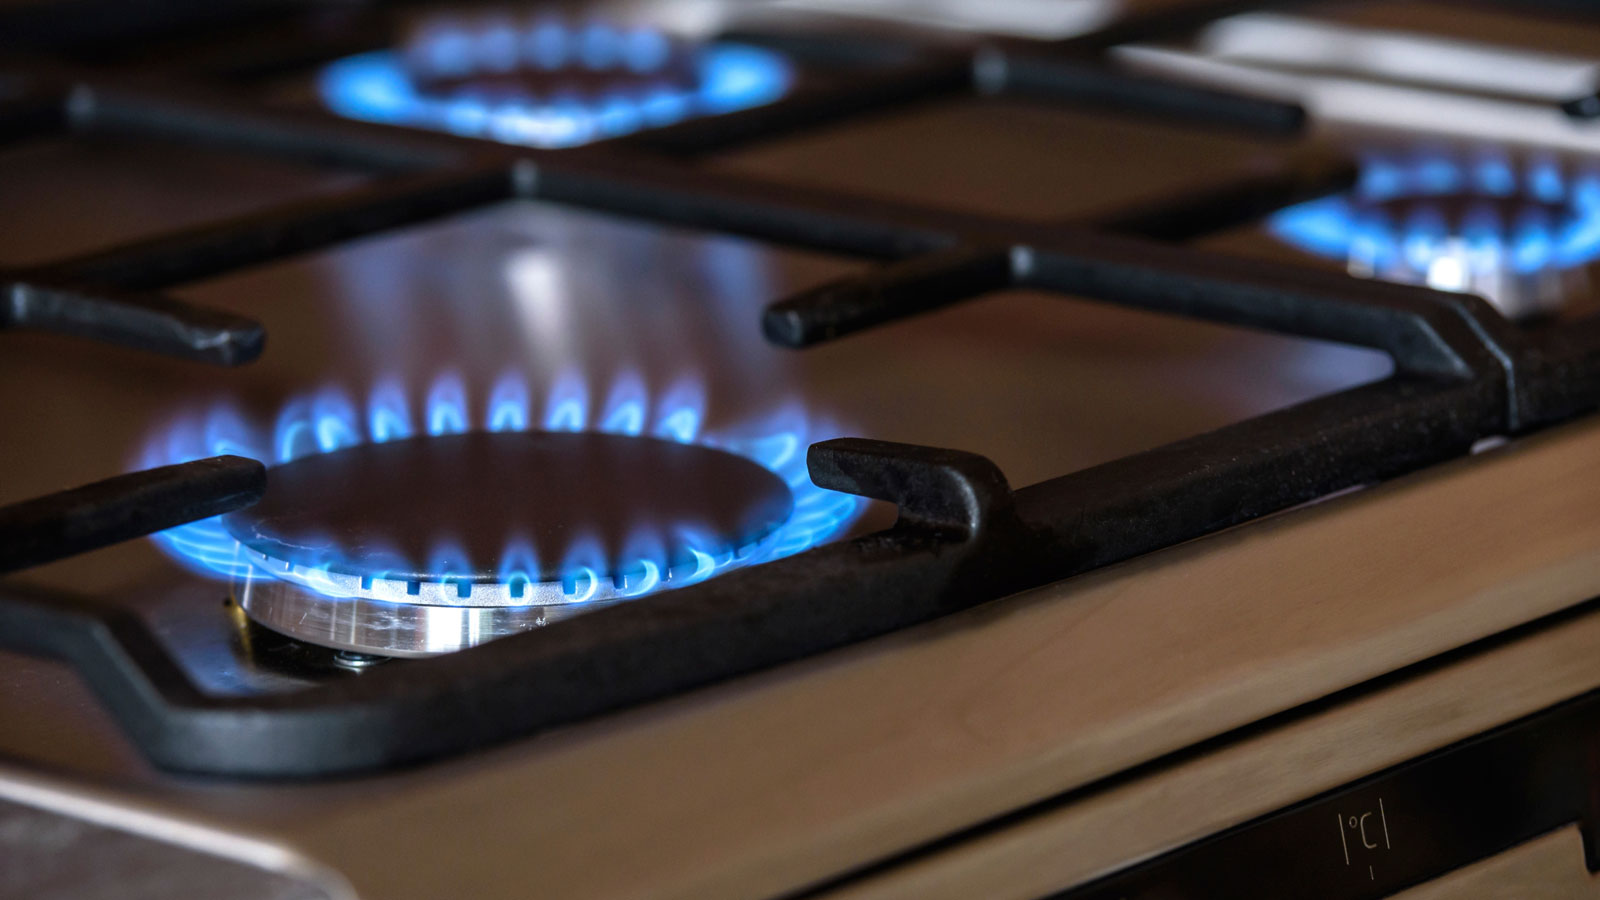 Do Professional Chefs Use Gas or Electric Stoves?